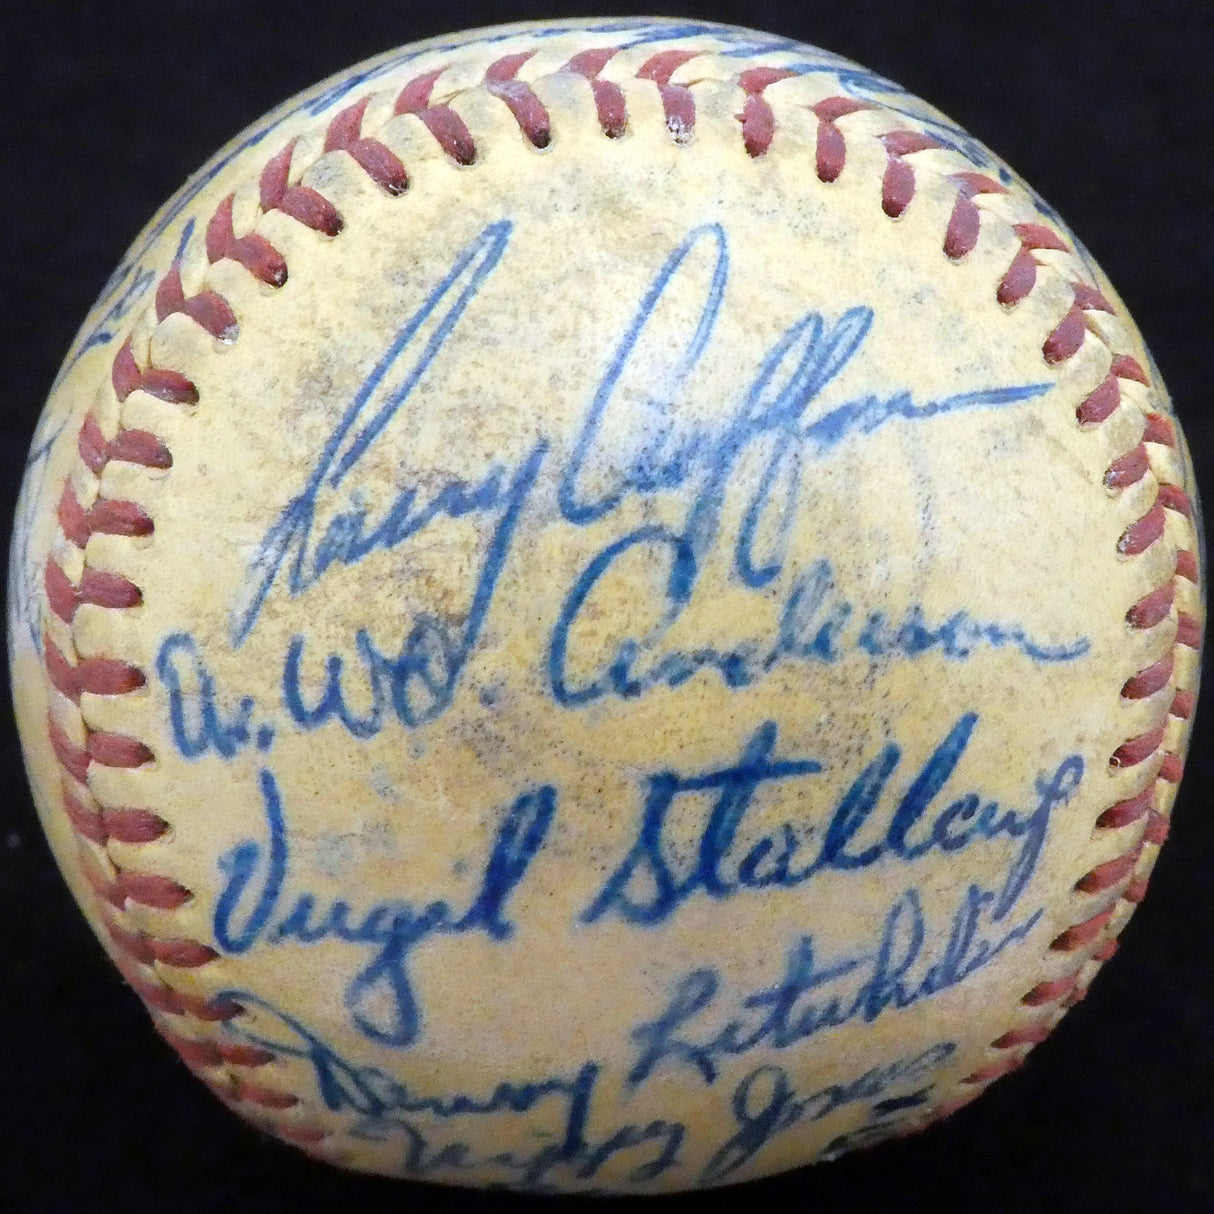 1951 St. Louis Cardinals & Cincinnati Reds Autographed Official Baseball With 23 Total Signatures Including Stan Musial Beckett BAS #A52633